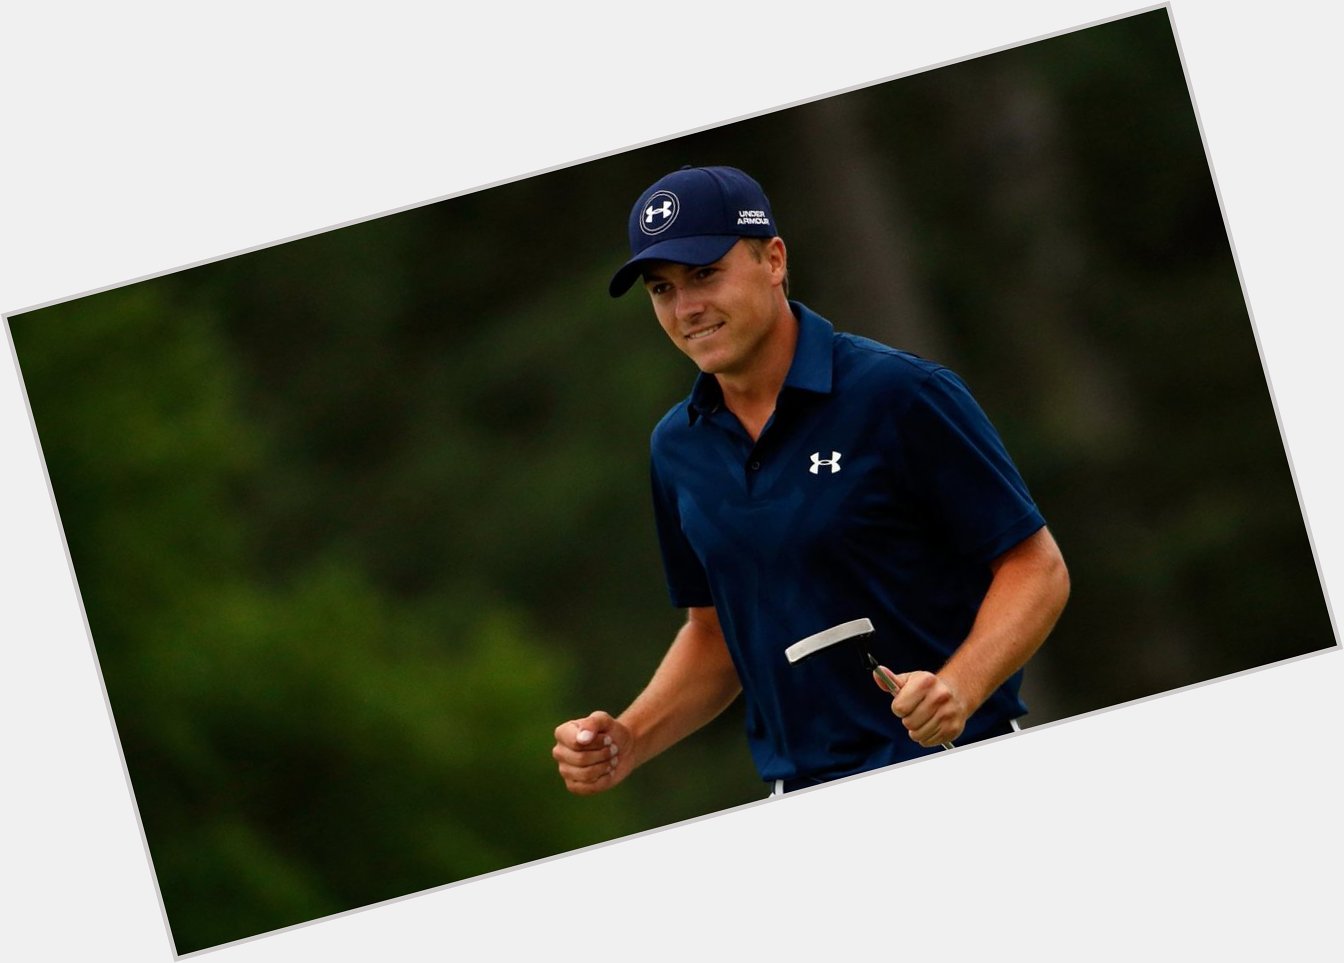  Masters US Open The Open  Not a bad haul for a 25-year-old. Happy birthday, Jordan Spieth. 